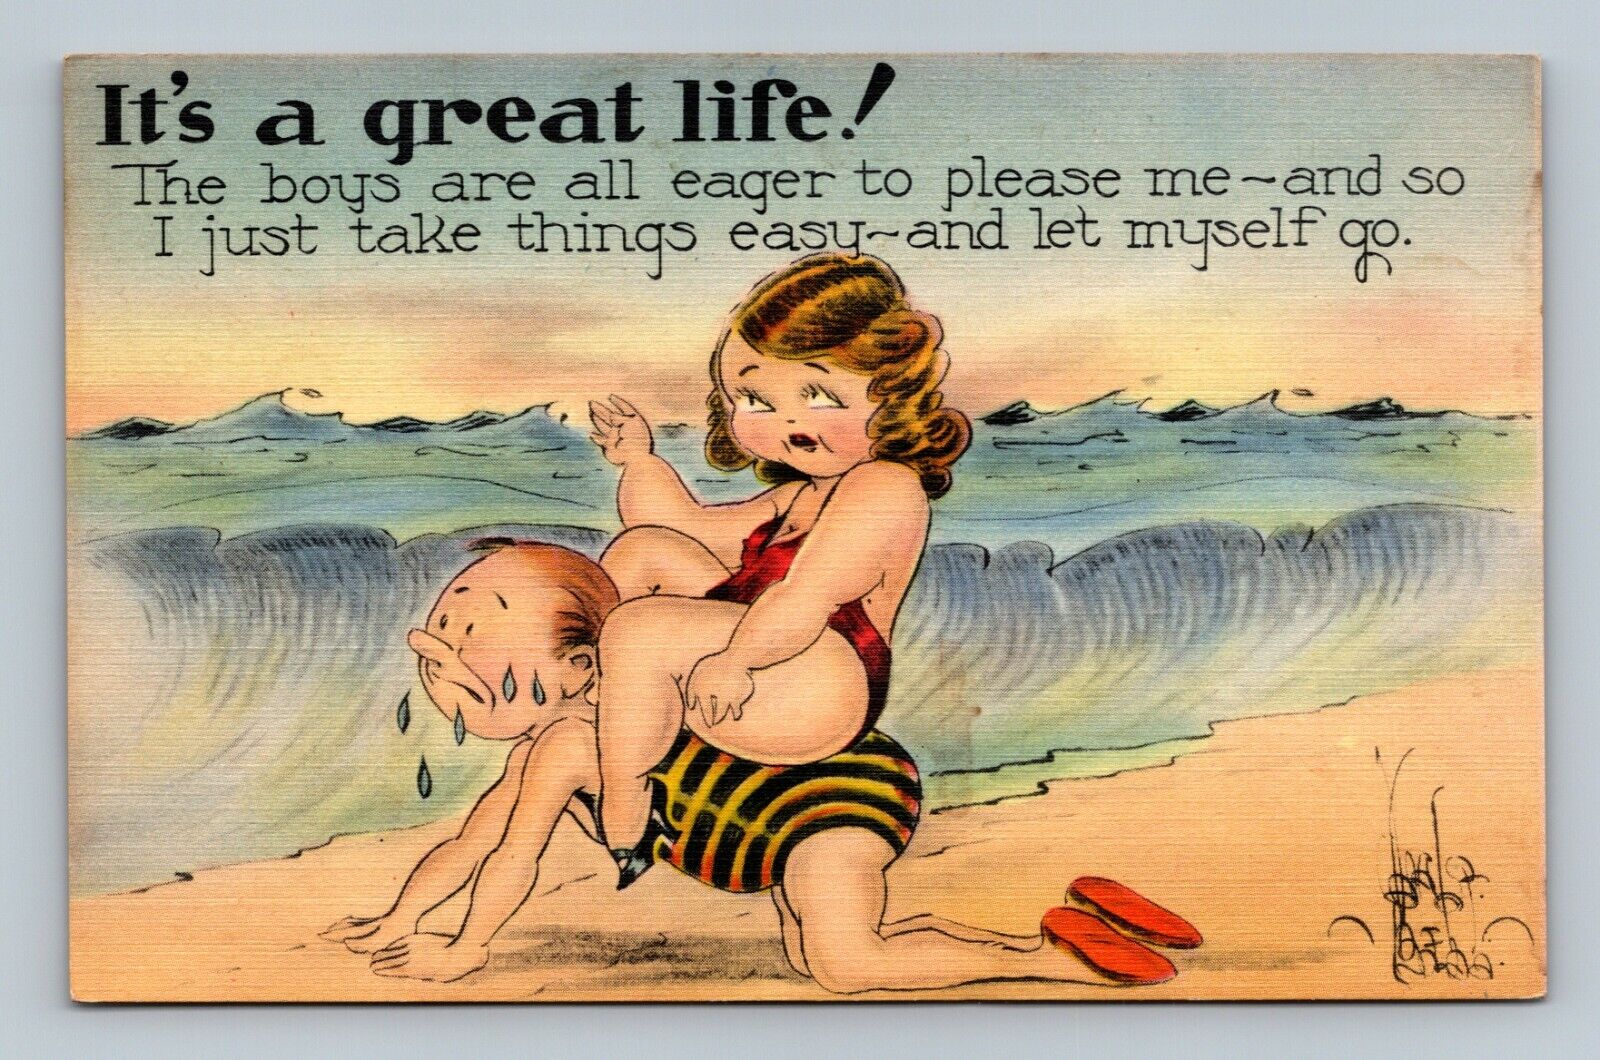 IT'S A GREAT LIFE VINTAGE ARTIST SIGNED POSTCARD